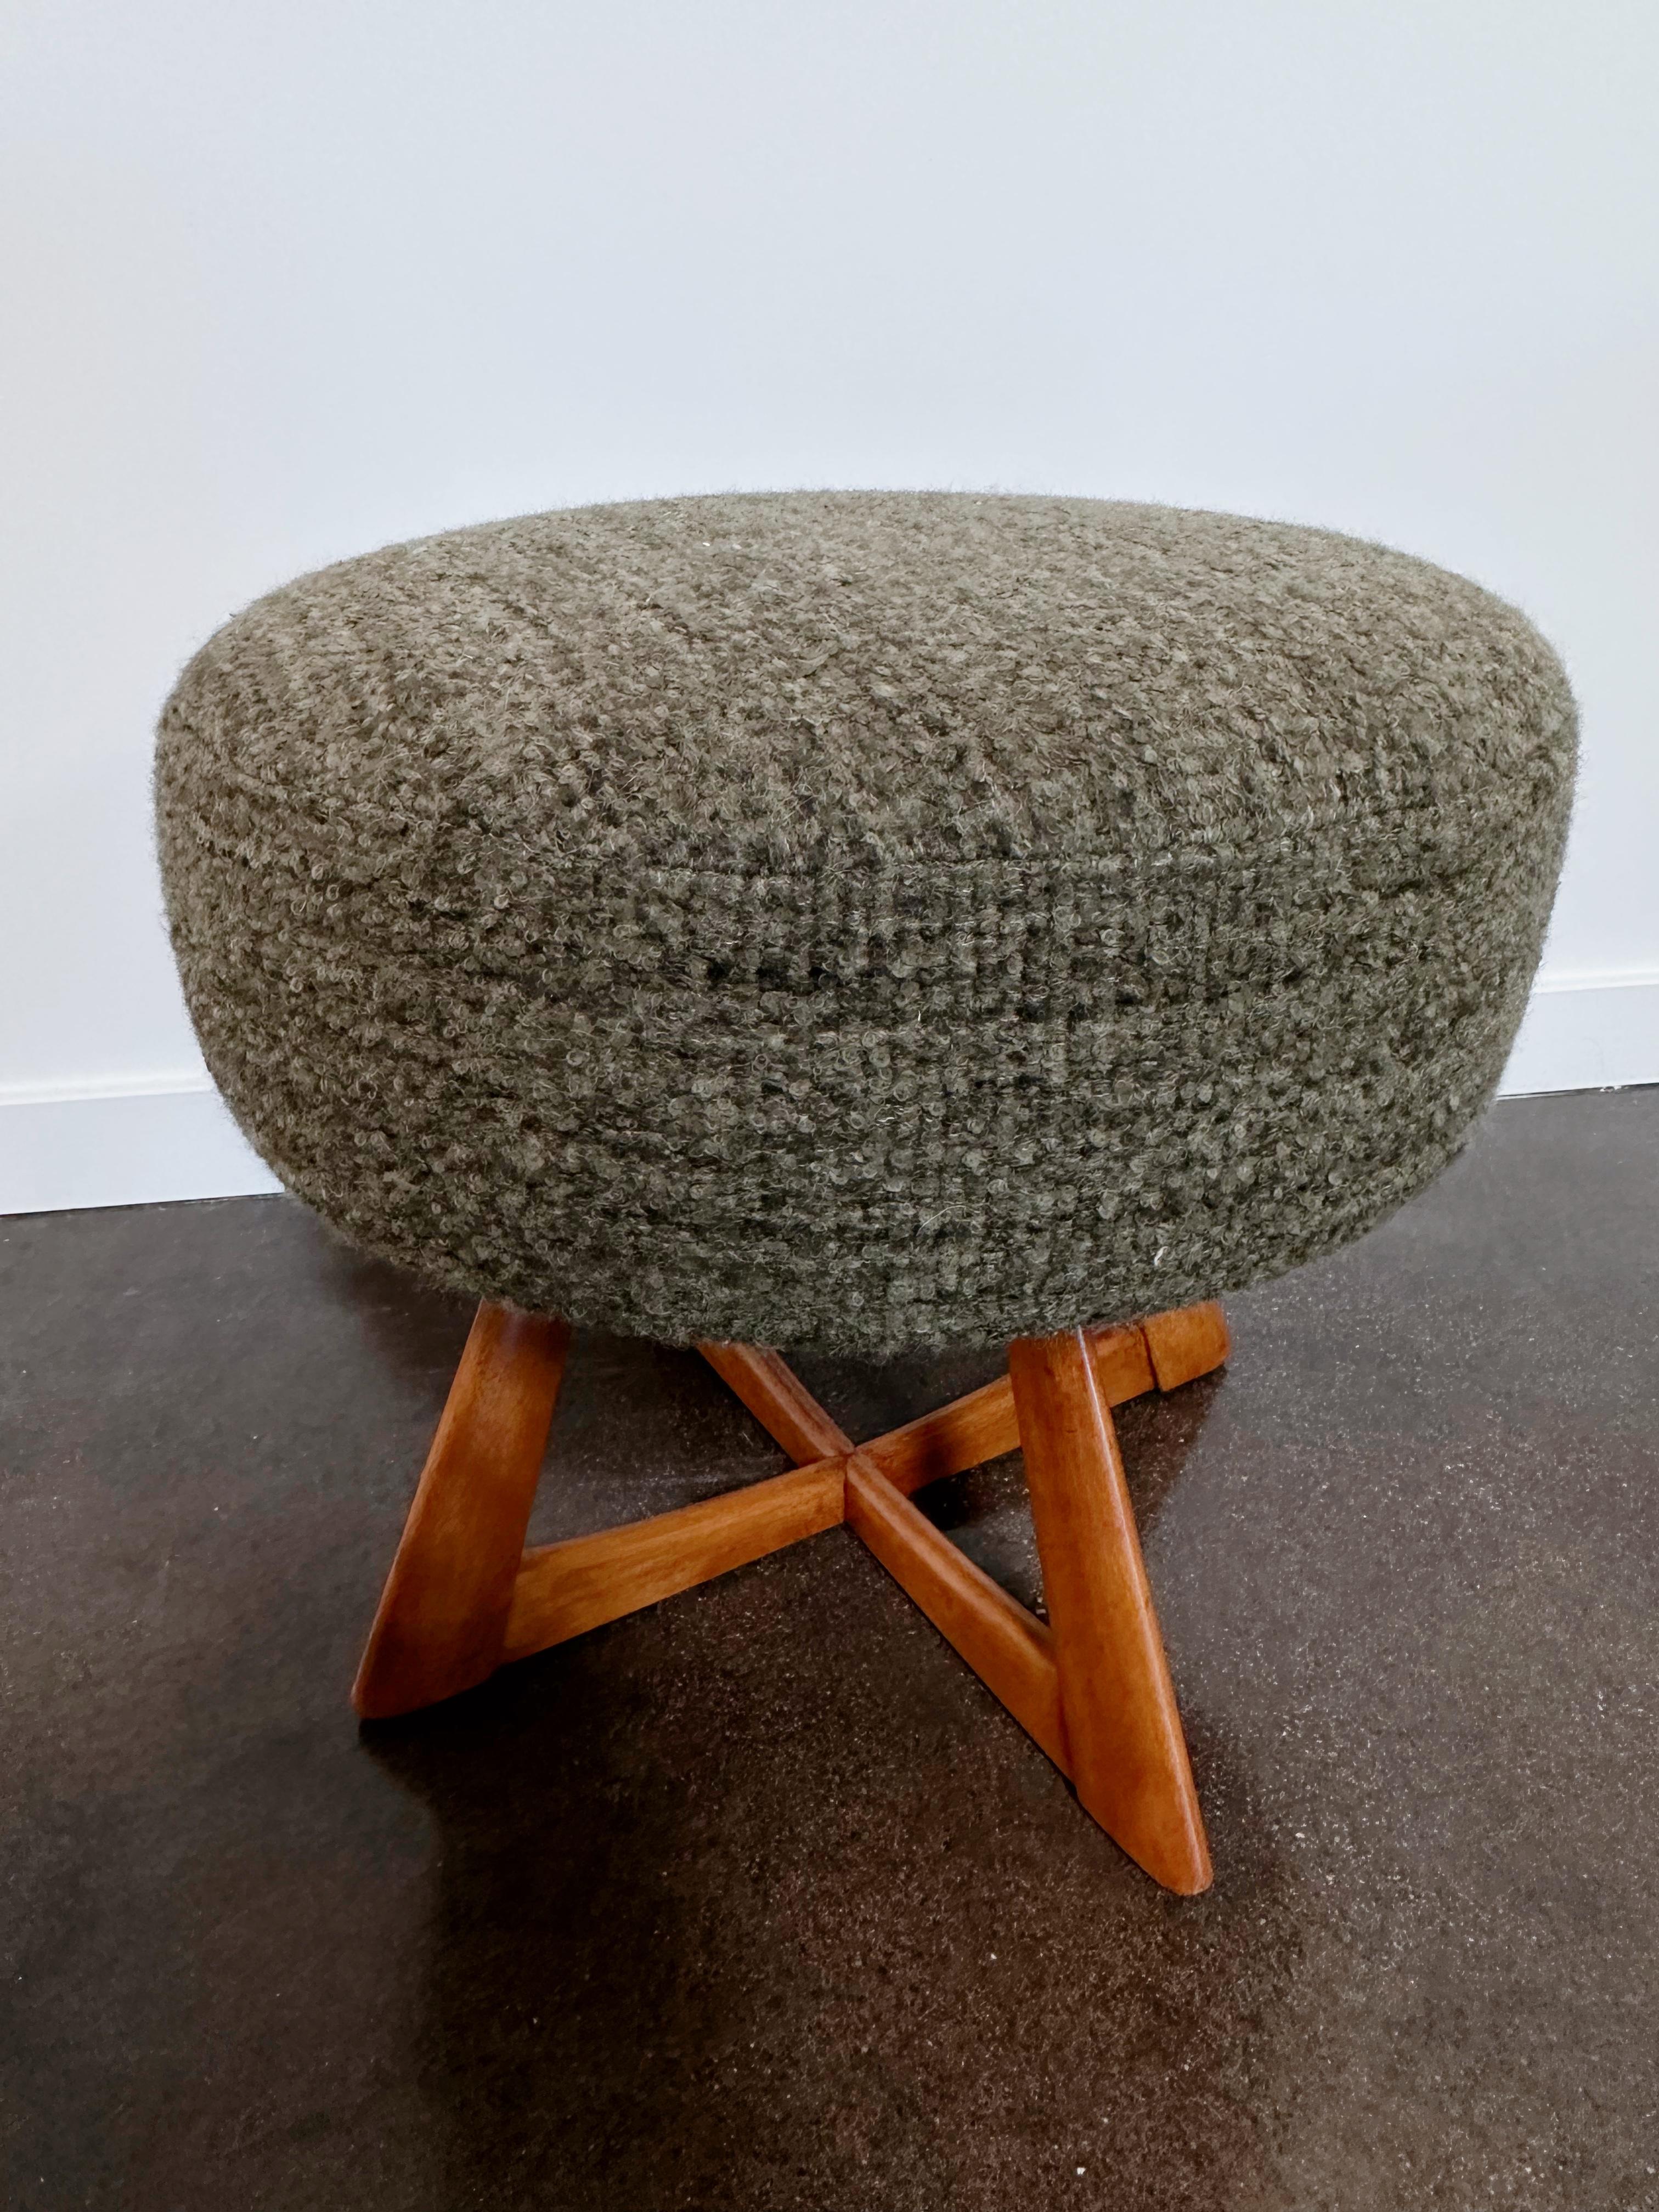 A swivel ottoman by furniture company Heywood Wakefield. The top has been redesigned and reupholstered in a Rosemary Hallgarten Alpaca. The cross legged maple base has been refinished and restored by us. 

About Heywood Wakefield
Established in